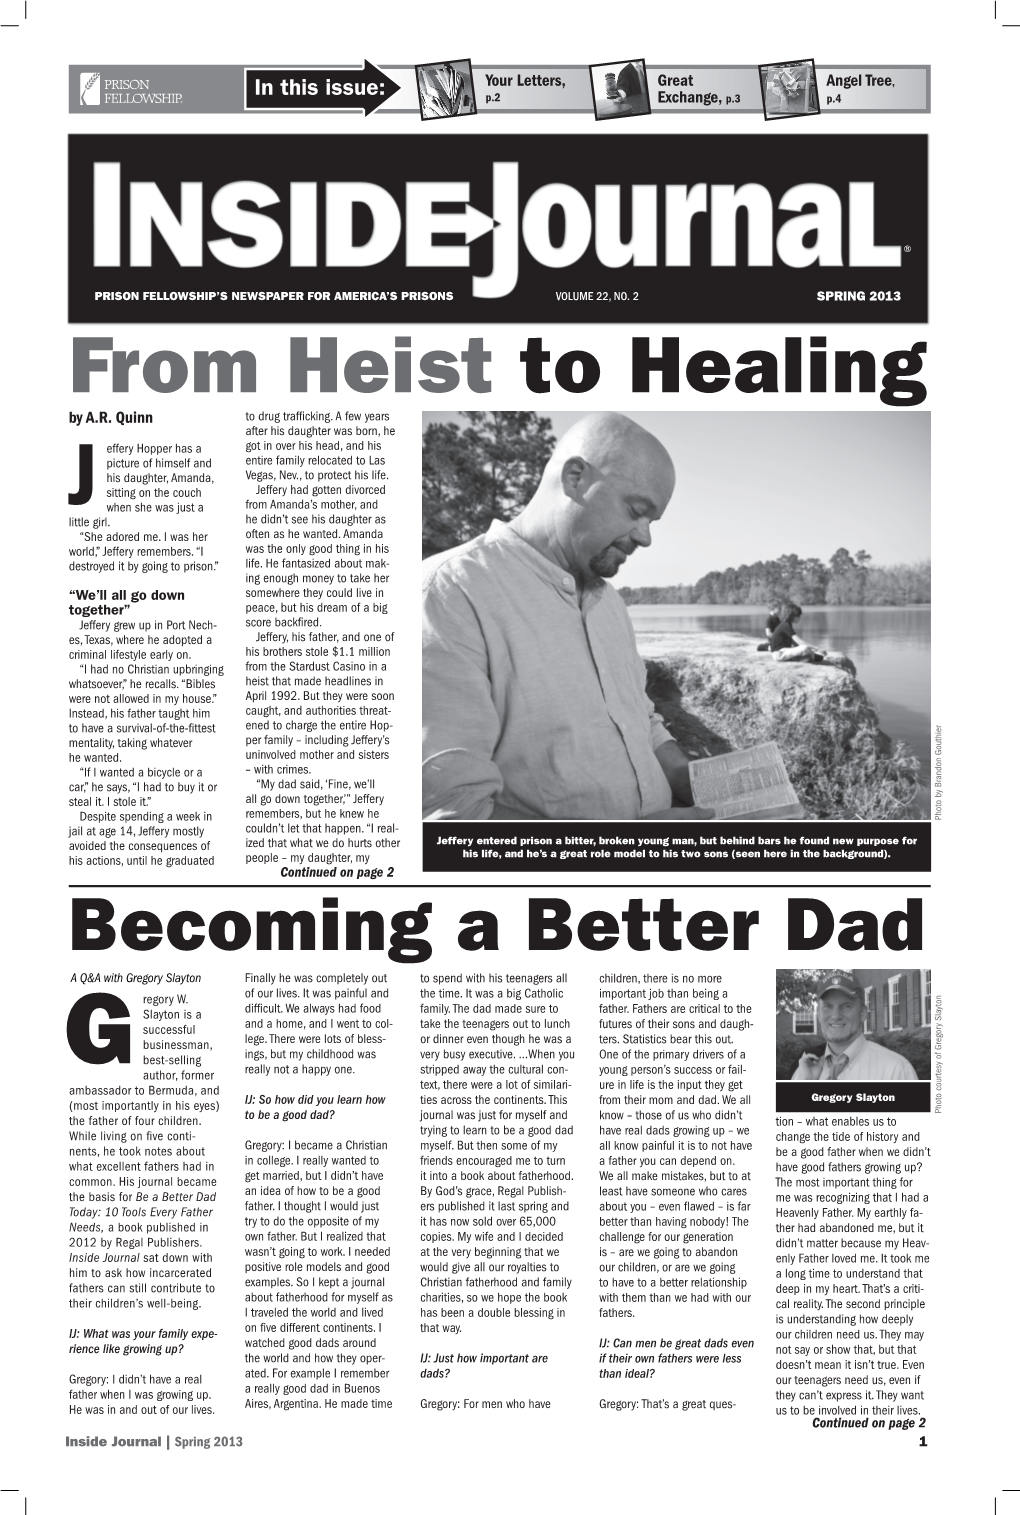 SPRING 2013 from Heist to Healing by A.R